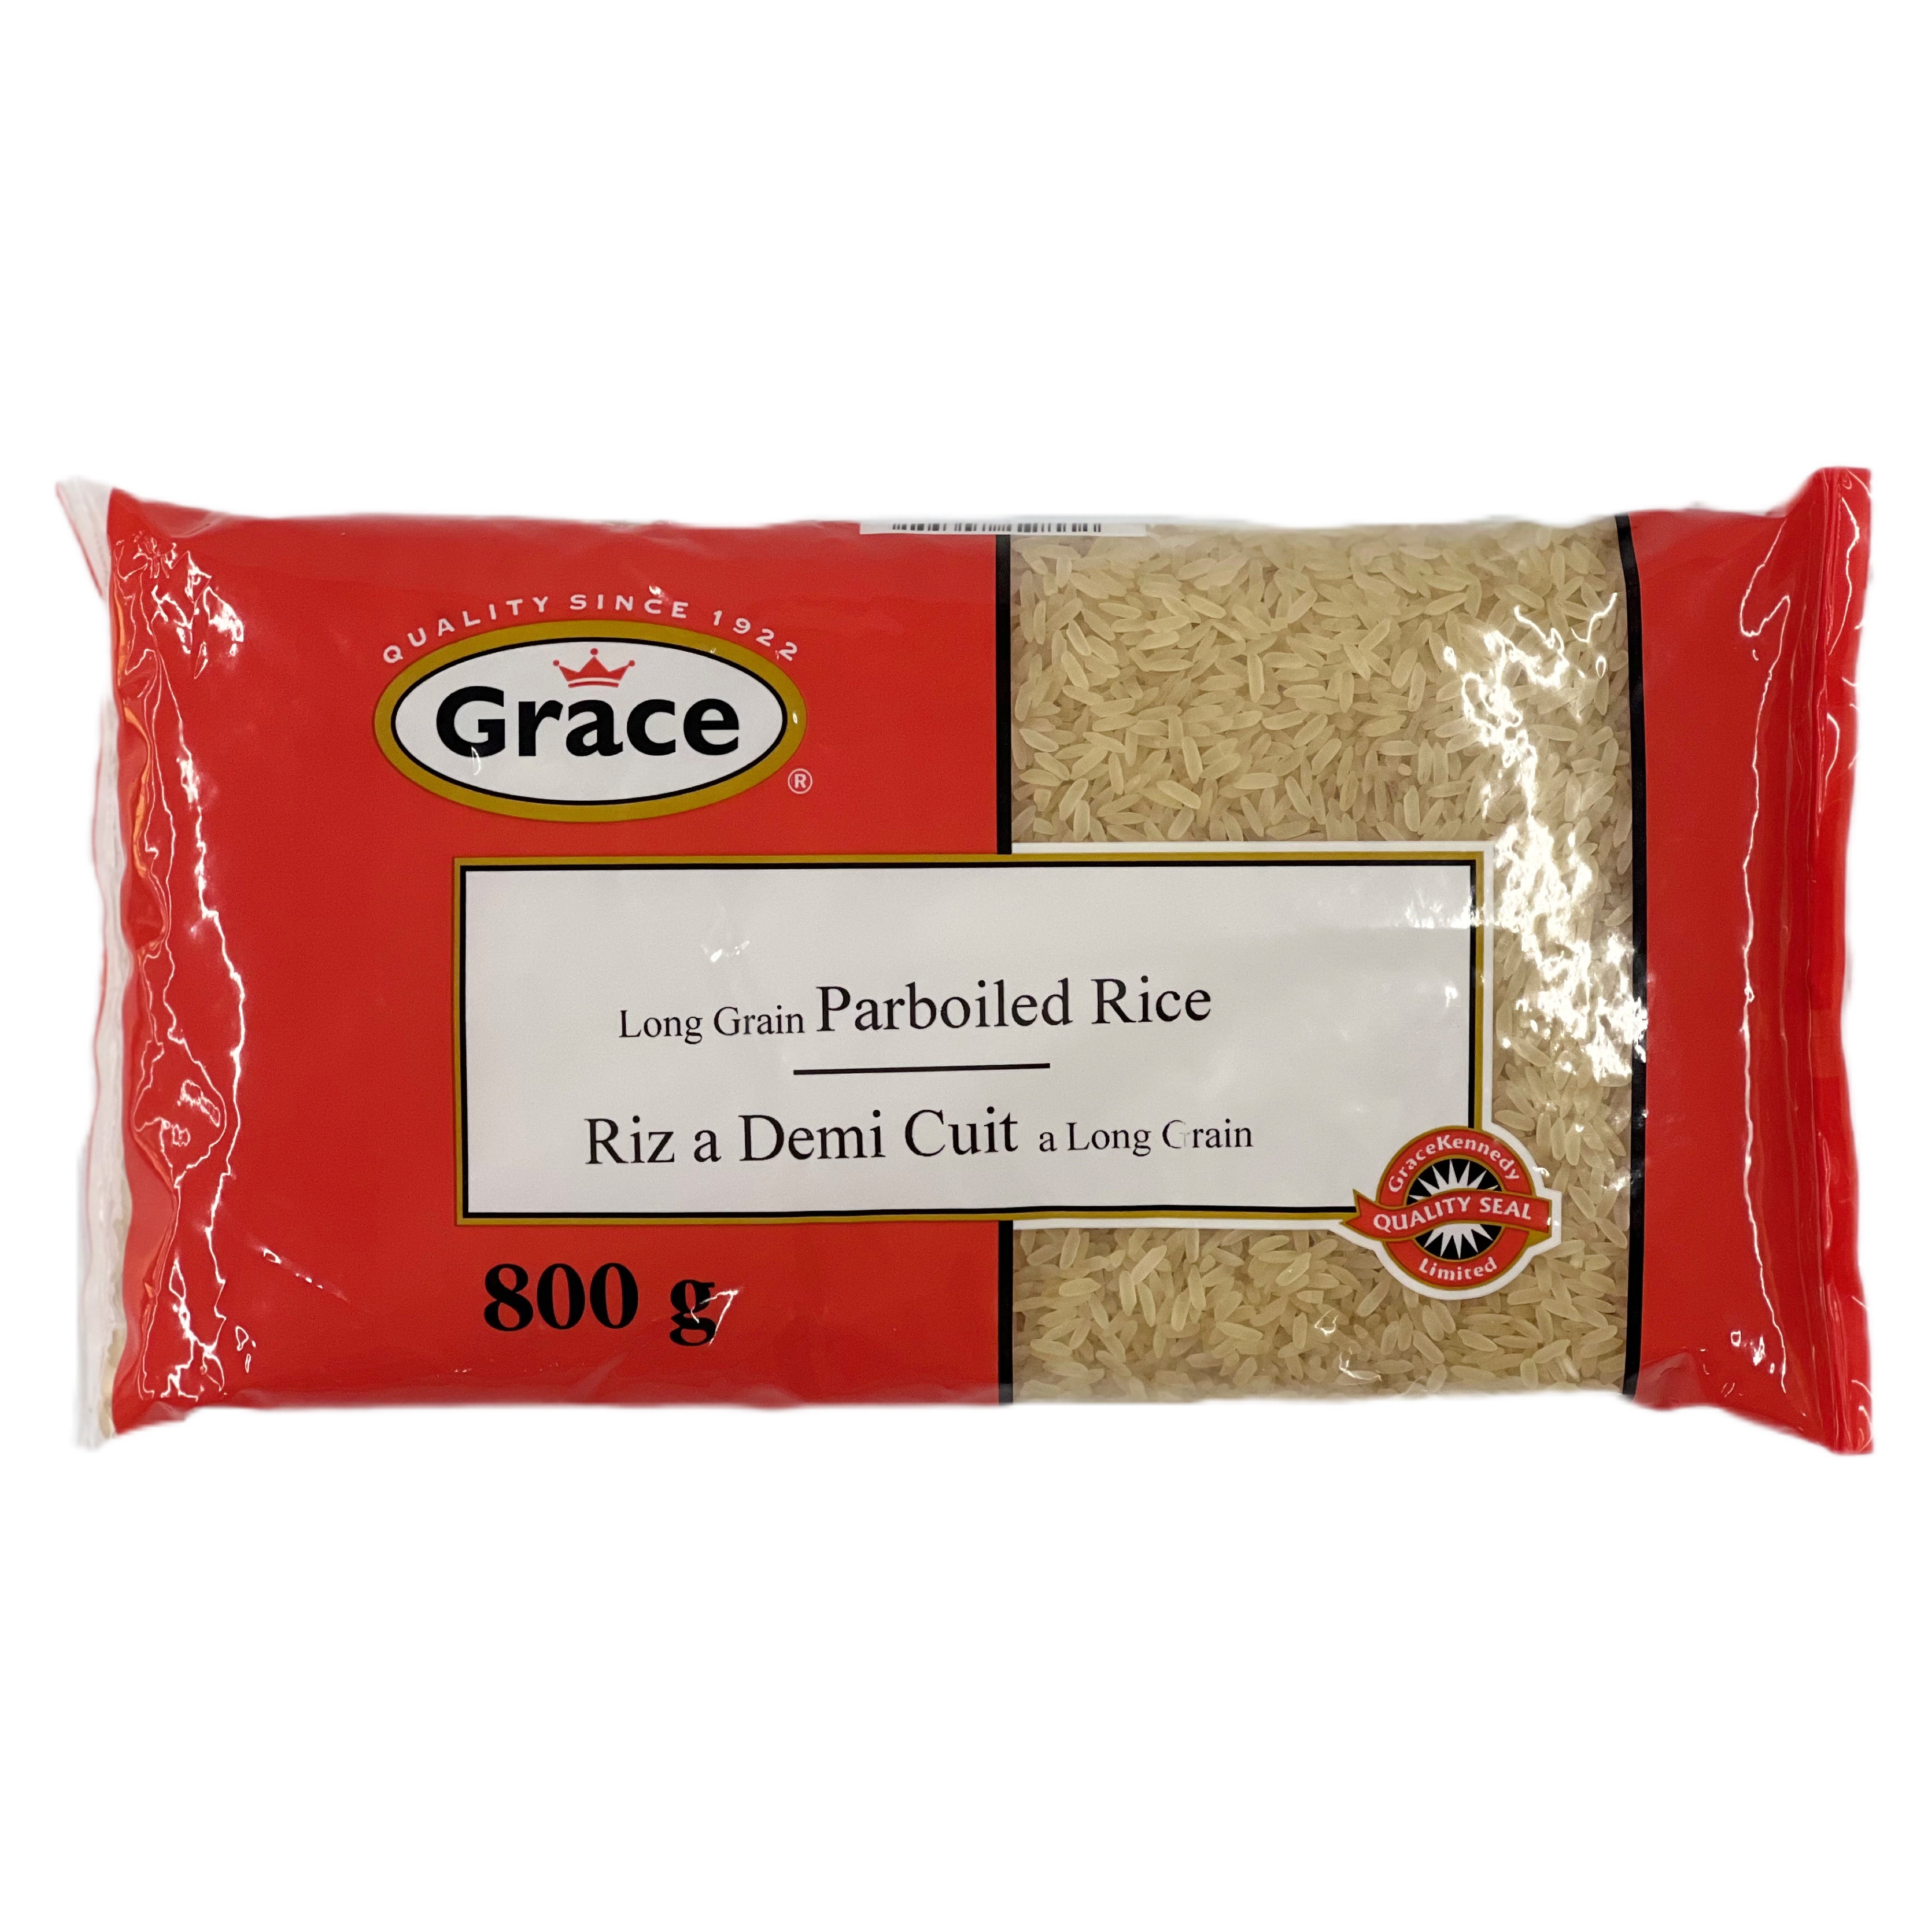 Grace Parboiled Rice 800g